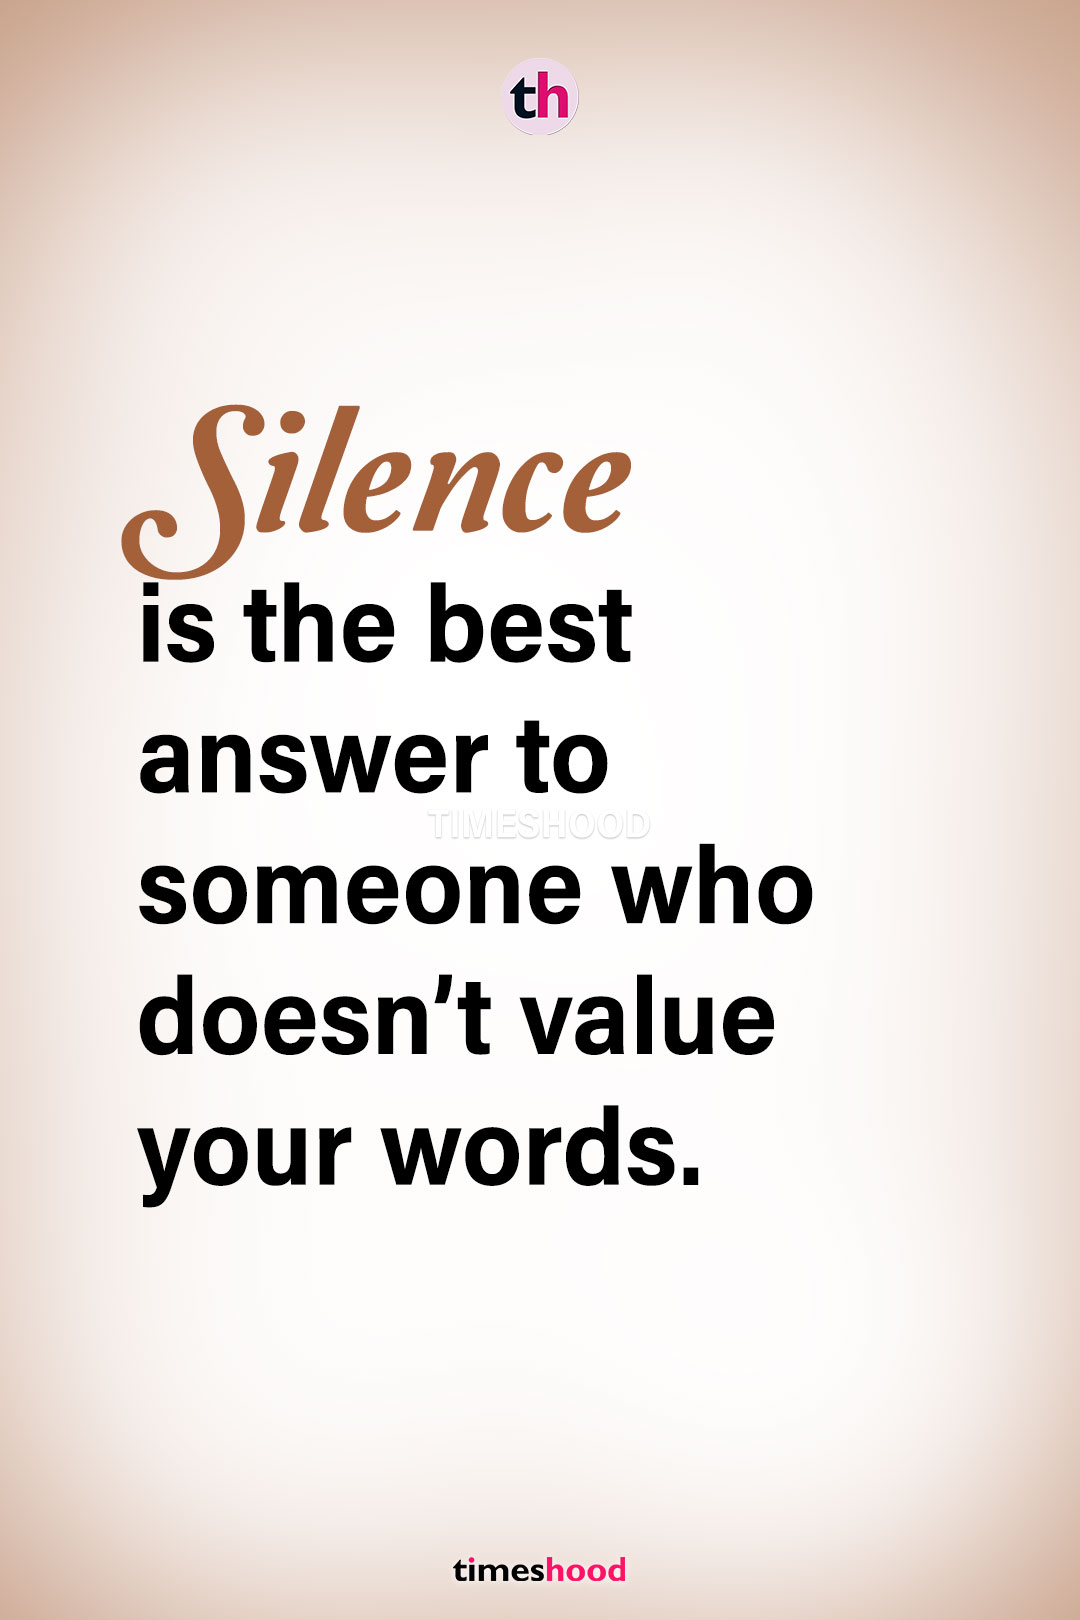 Silence is the best answer - power of silence quotes